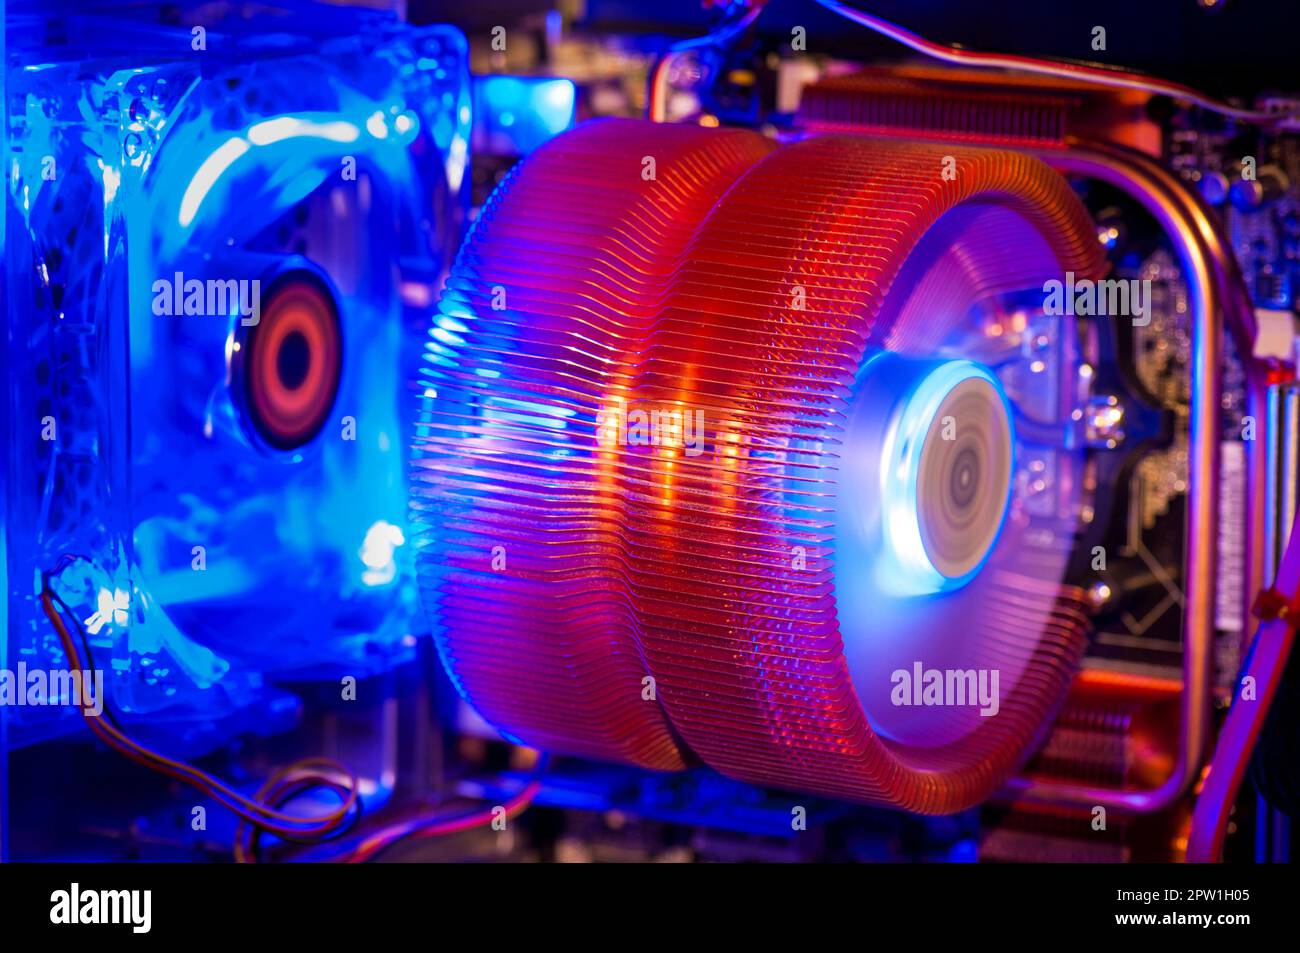 Colorful illuminated fans with cooling fins inside personal computer Stock Photo